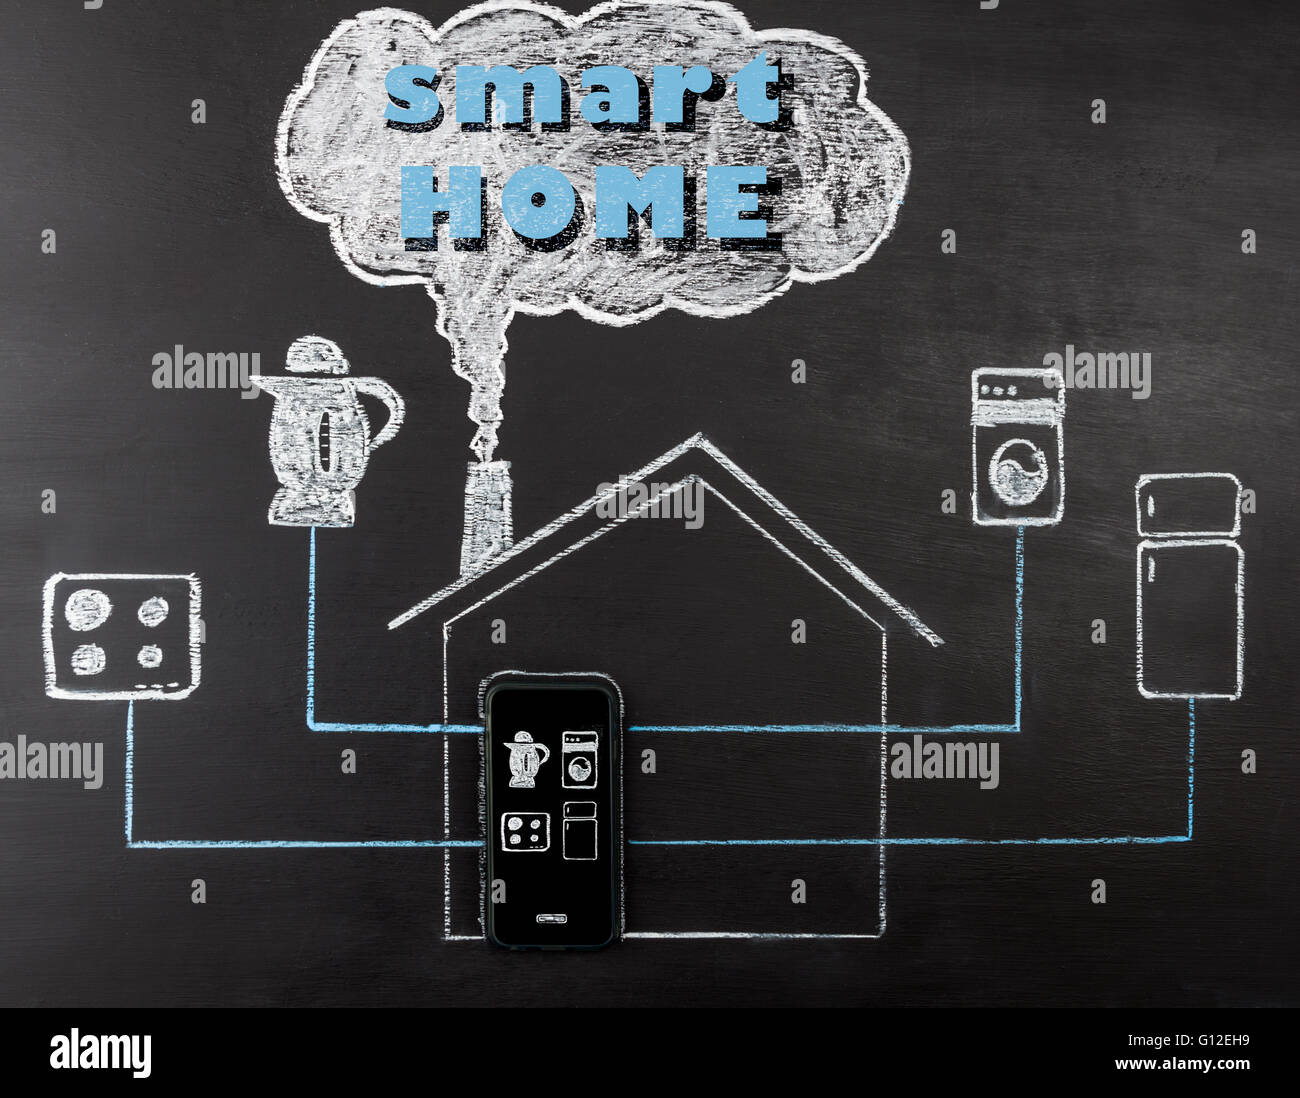 Smart house concept hand drawing on chalk board. Mobile phone controlling home appliances. Horizontal image with text. Stock Photo